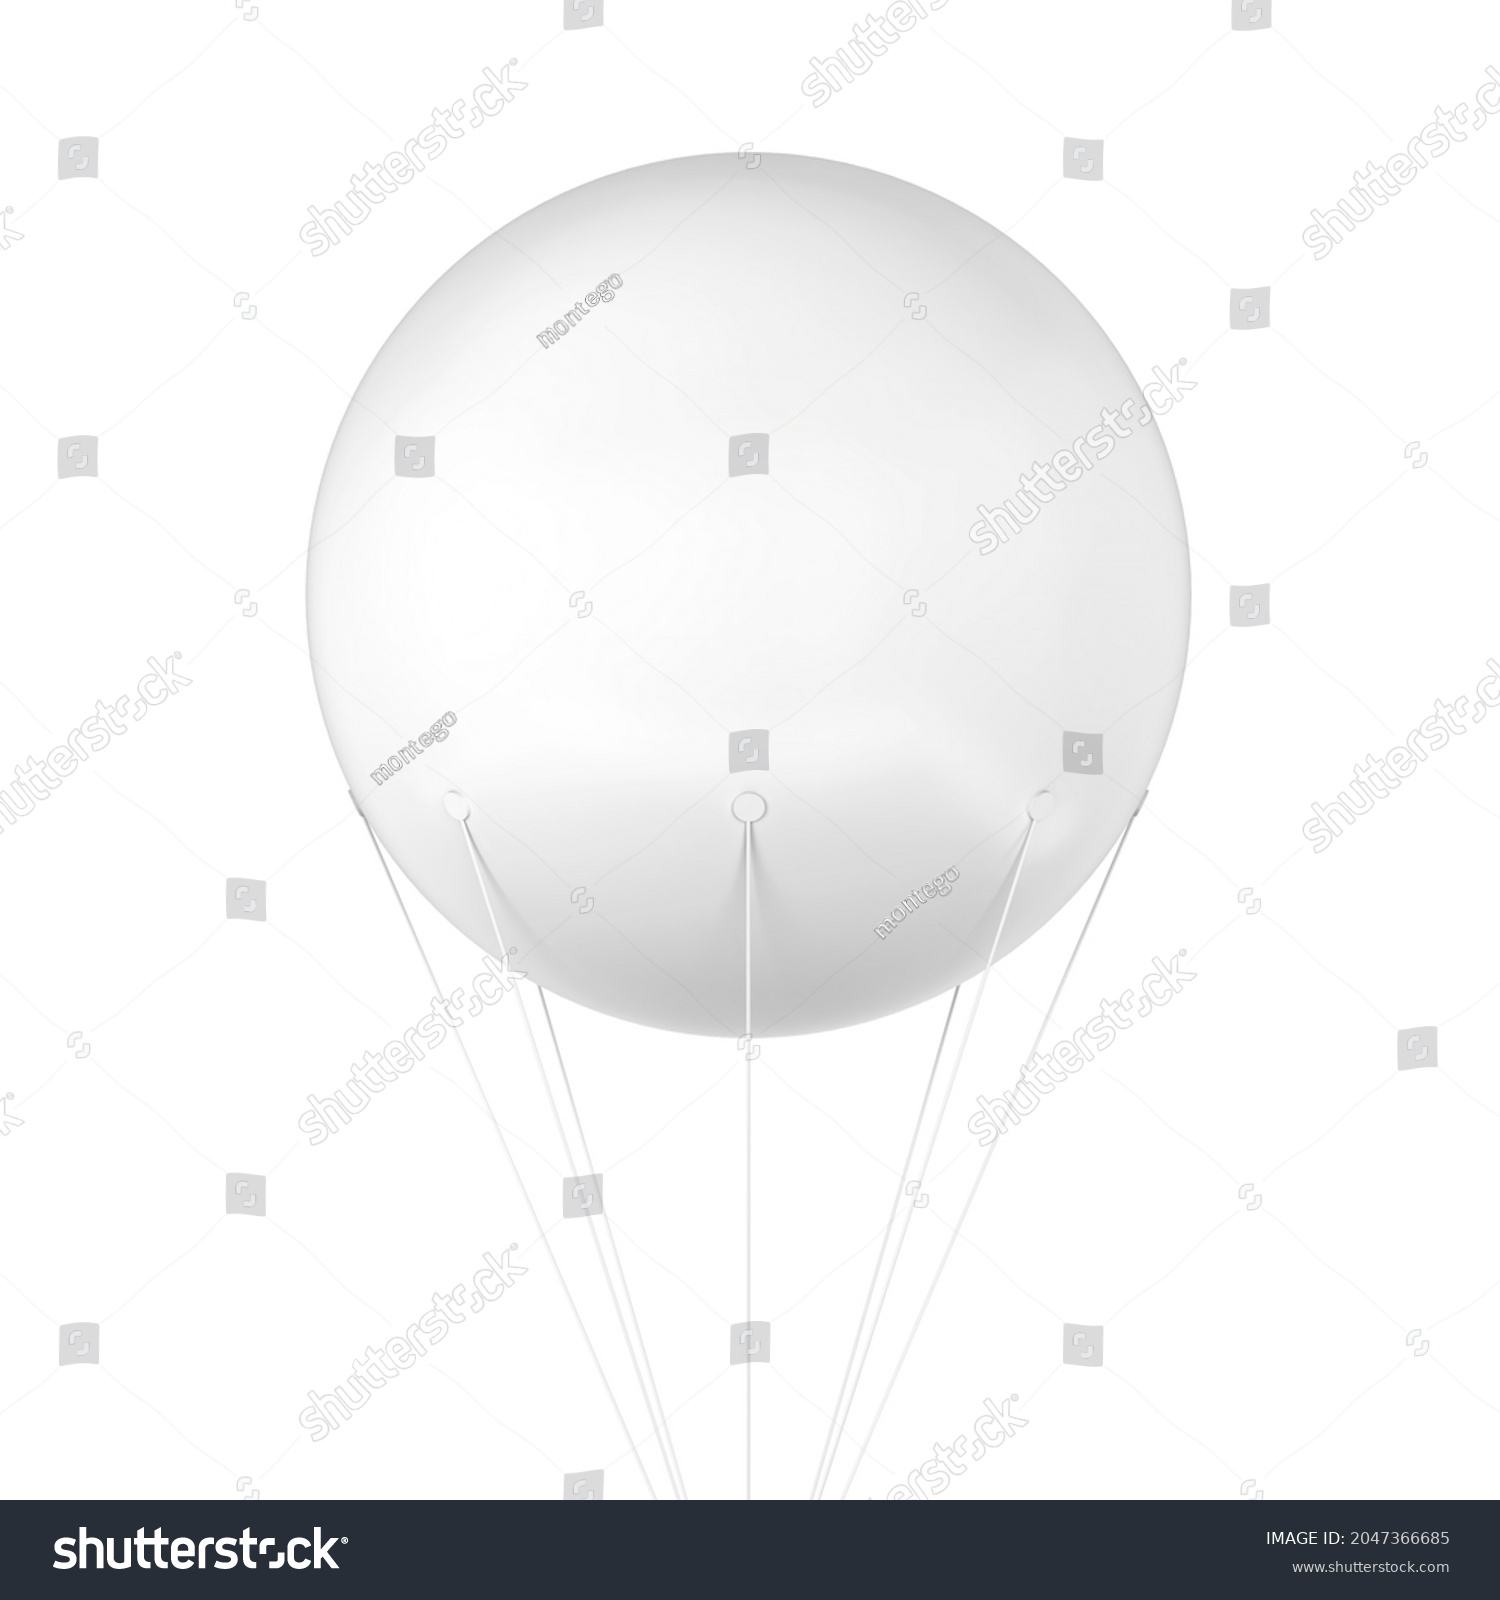 Inflatable sky advertising balloon. 3d illustration isolated on white background  #2047366685